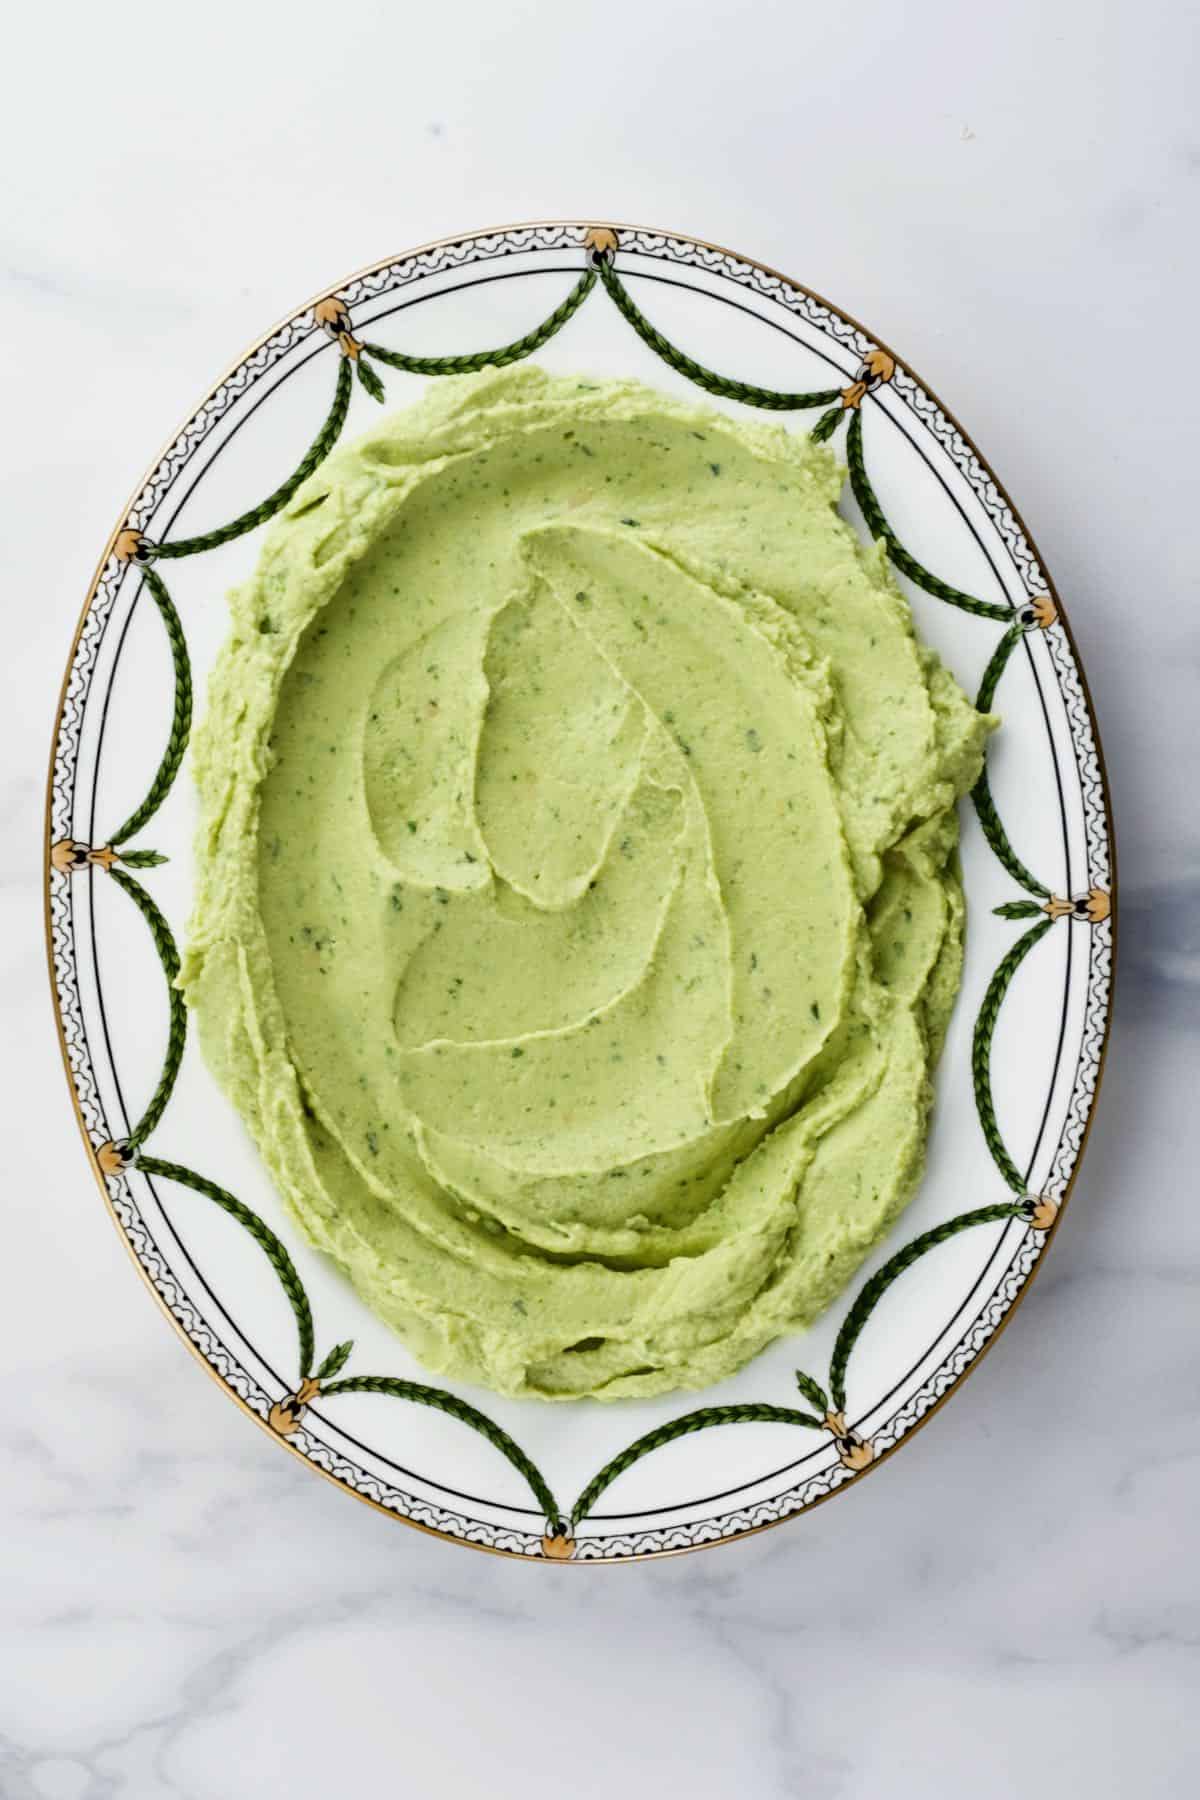 A plate with basil hummus